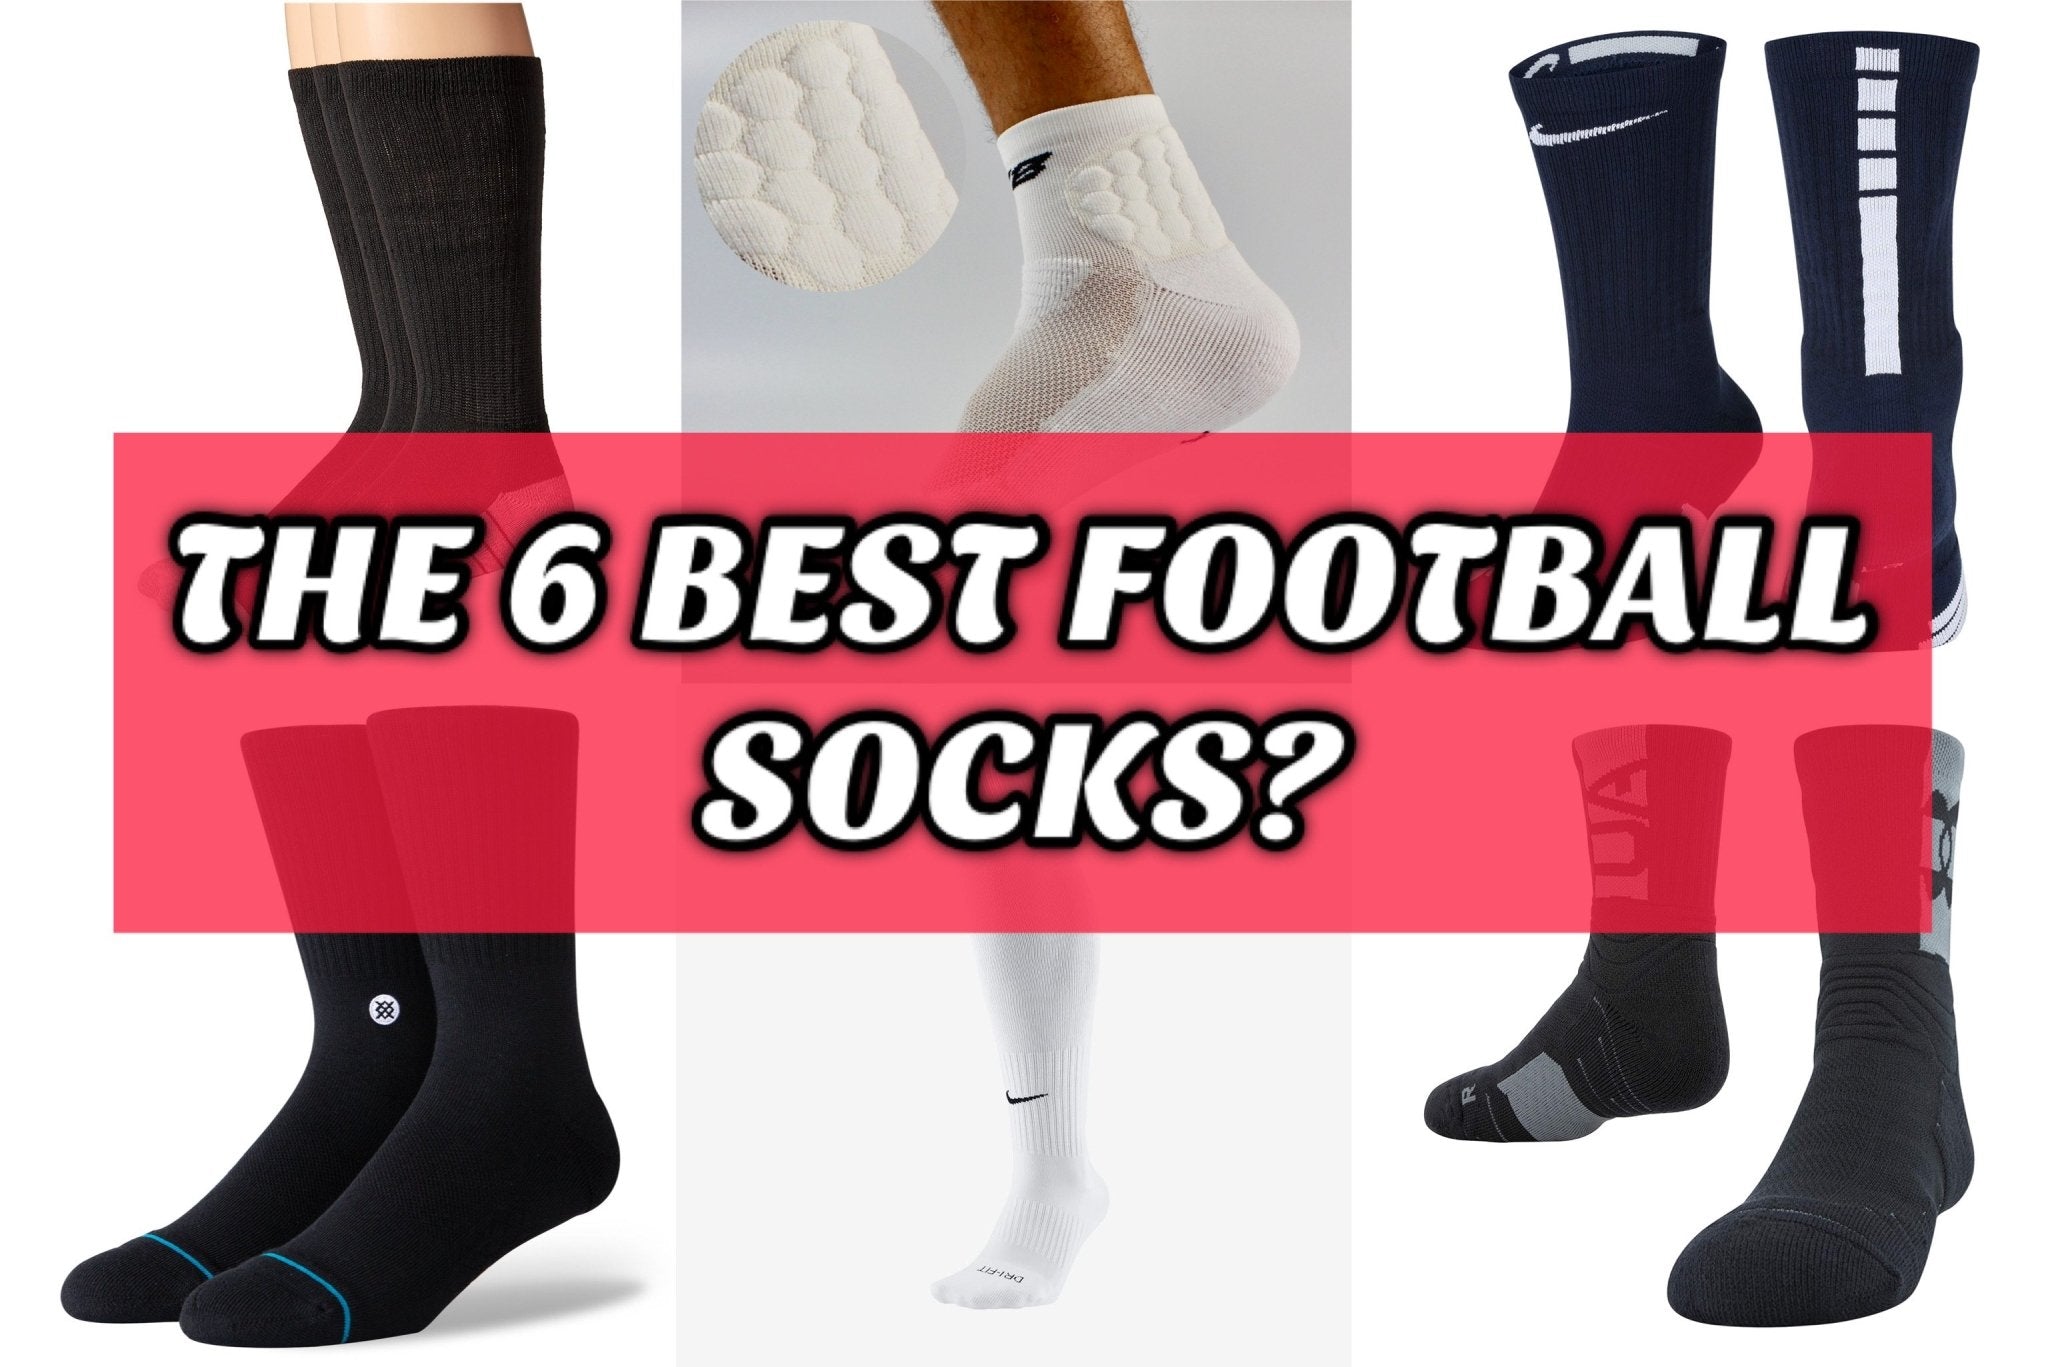 What is the best way to wear football socks?